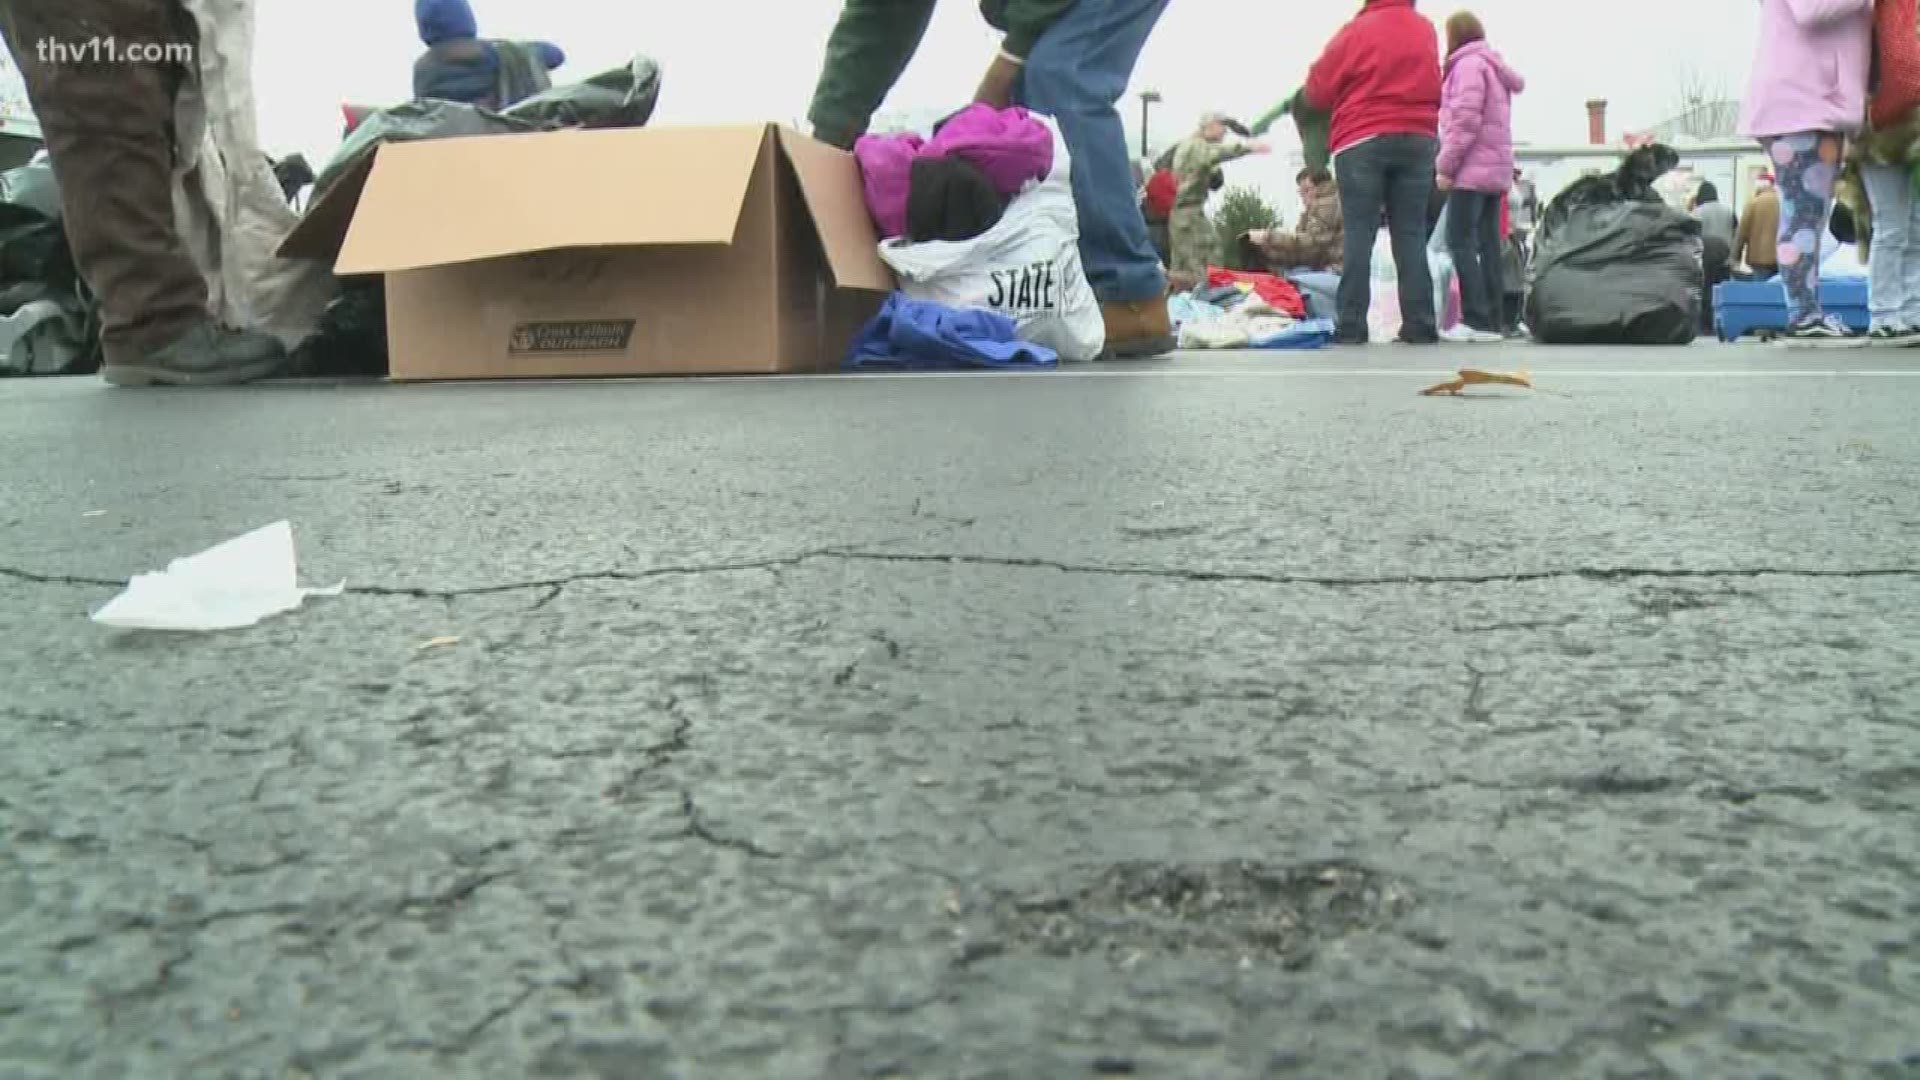 Santa came to Little Rock a little early this year-- with gifts for people in need.